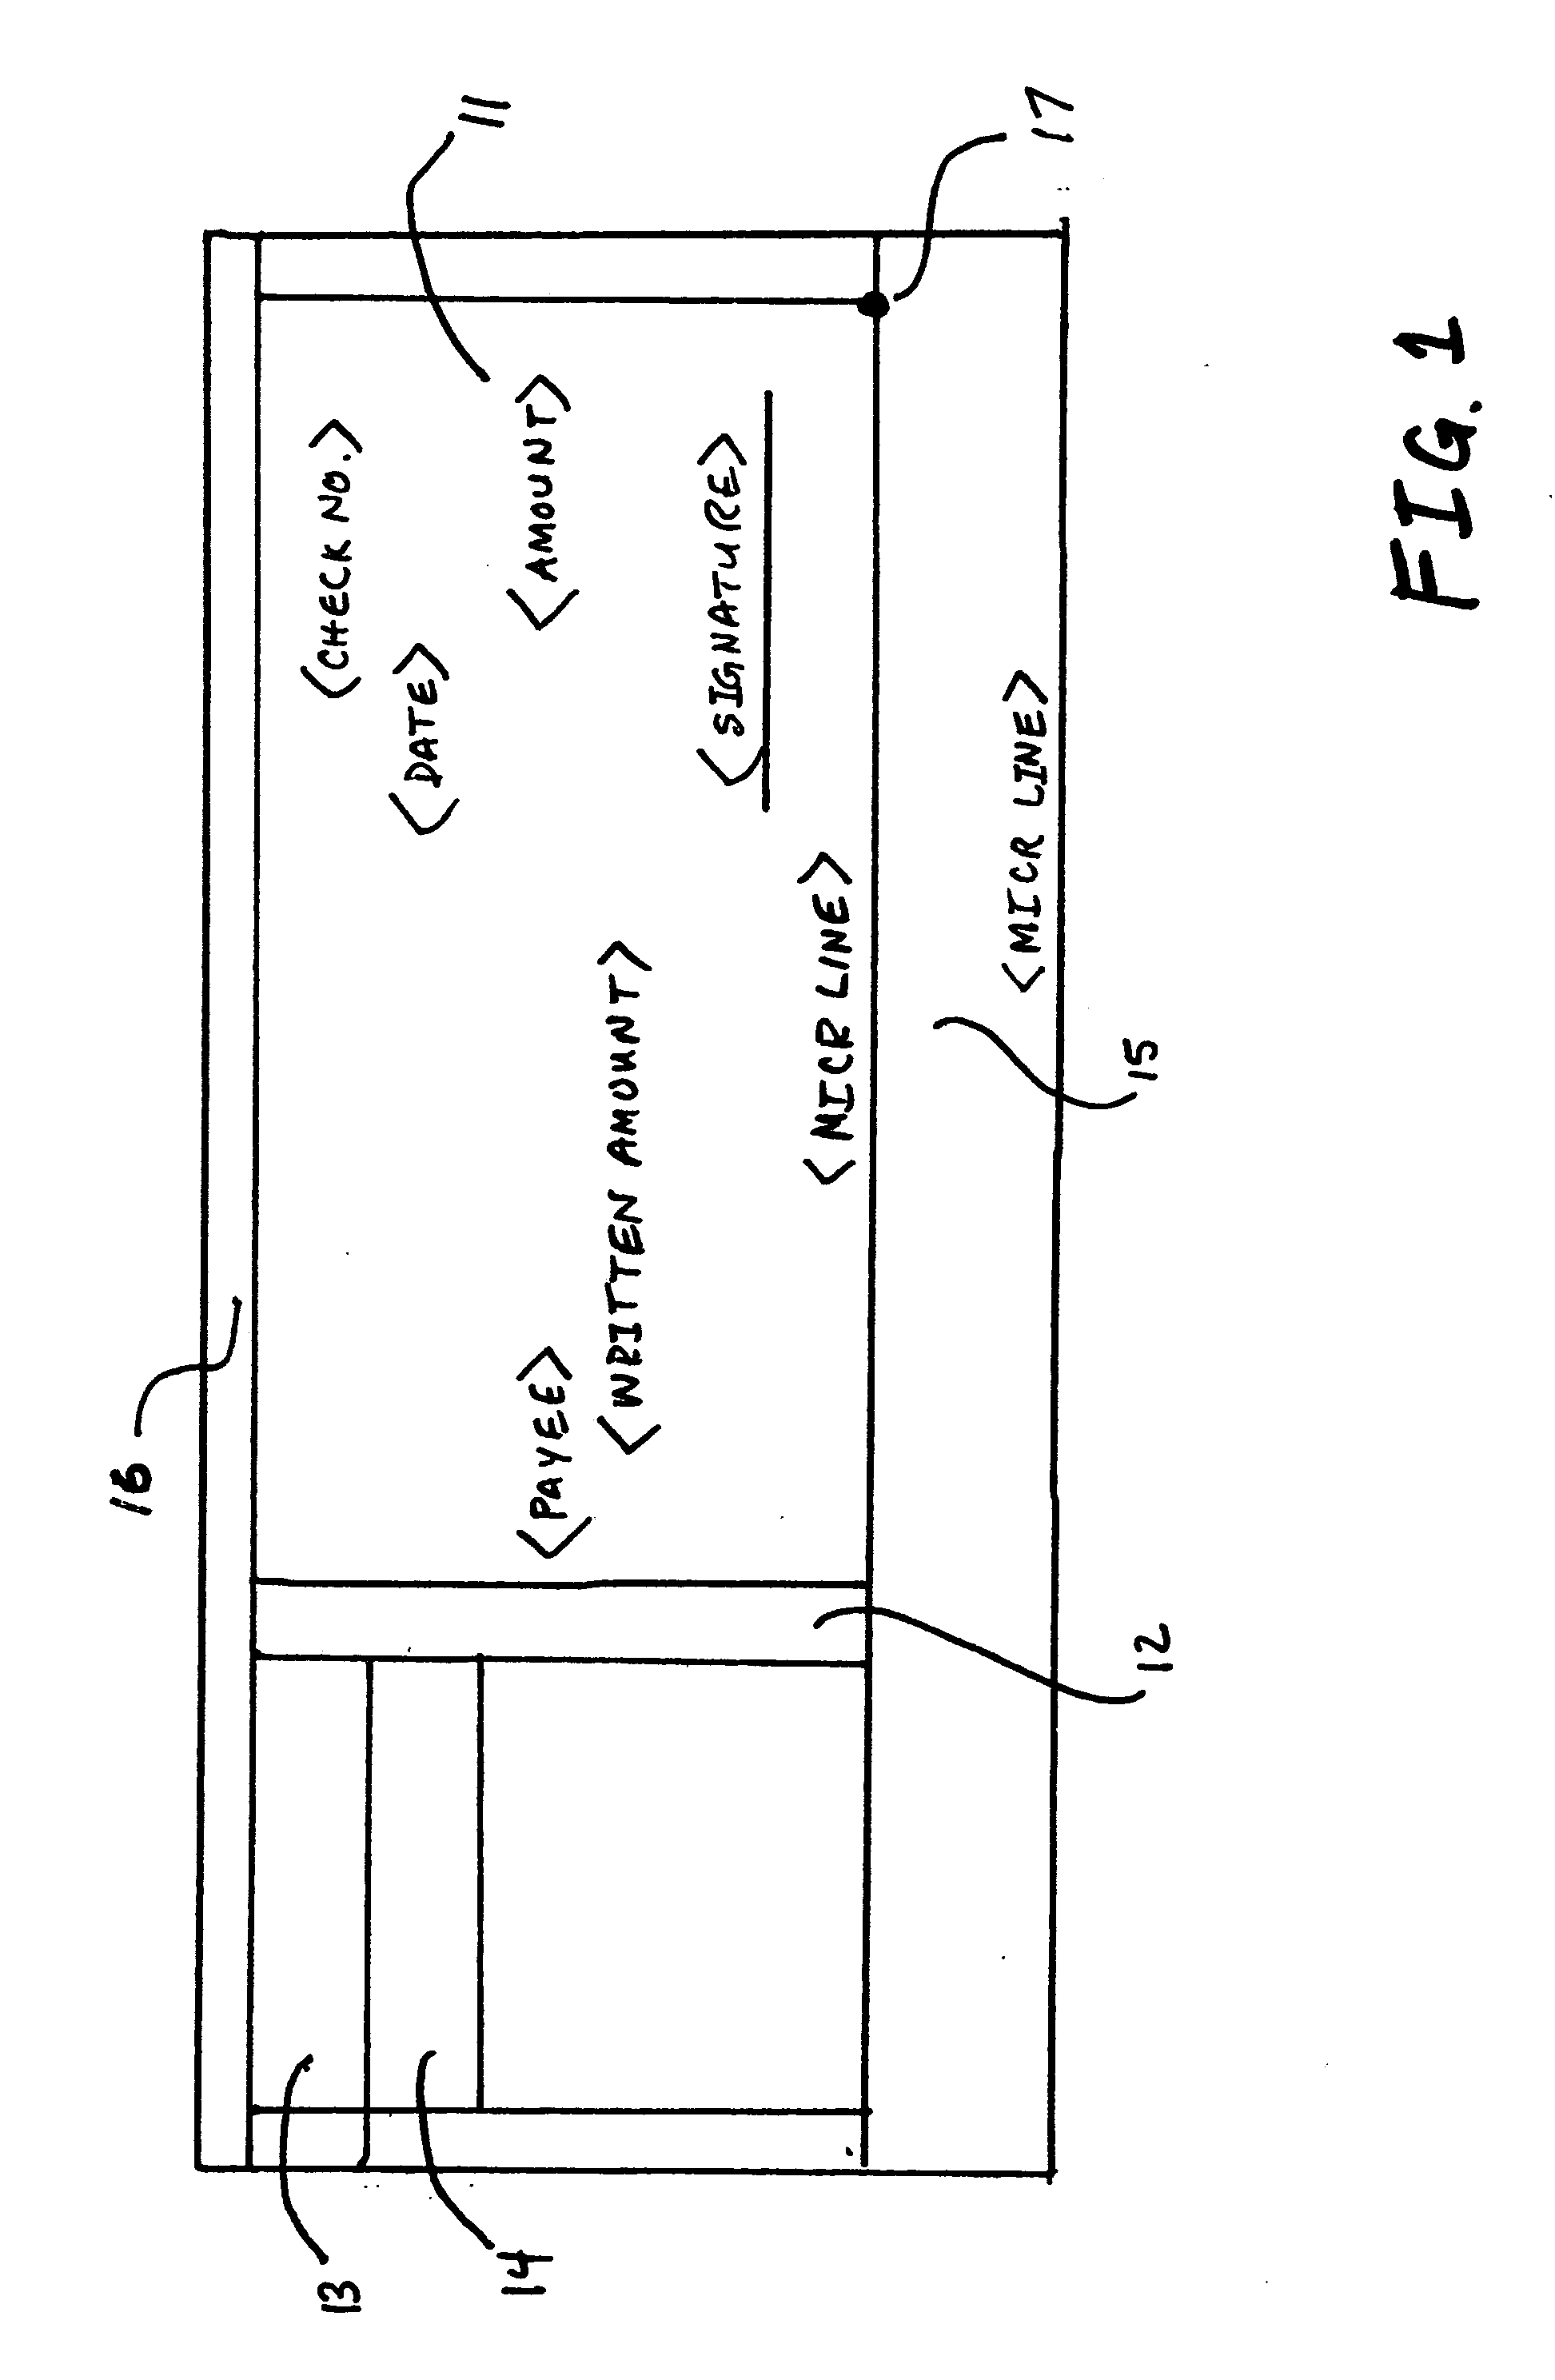 Bank check and method for positioning and interpreting a digital check within a defined region